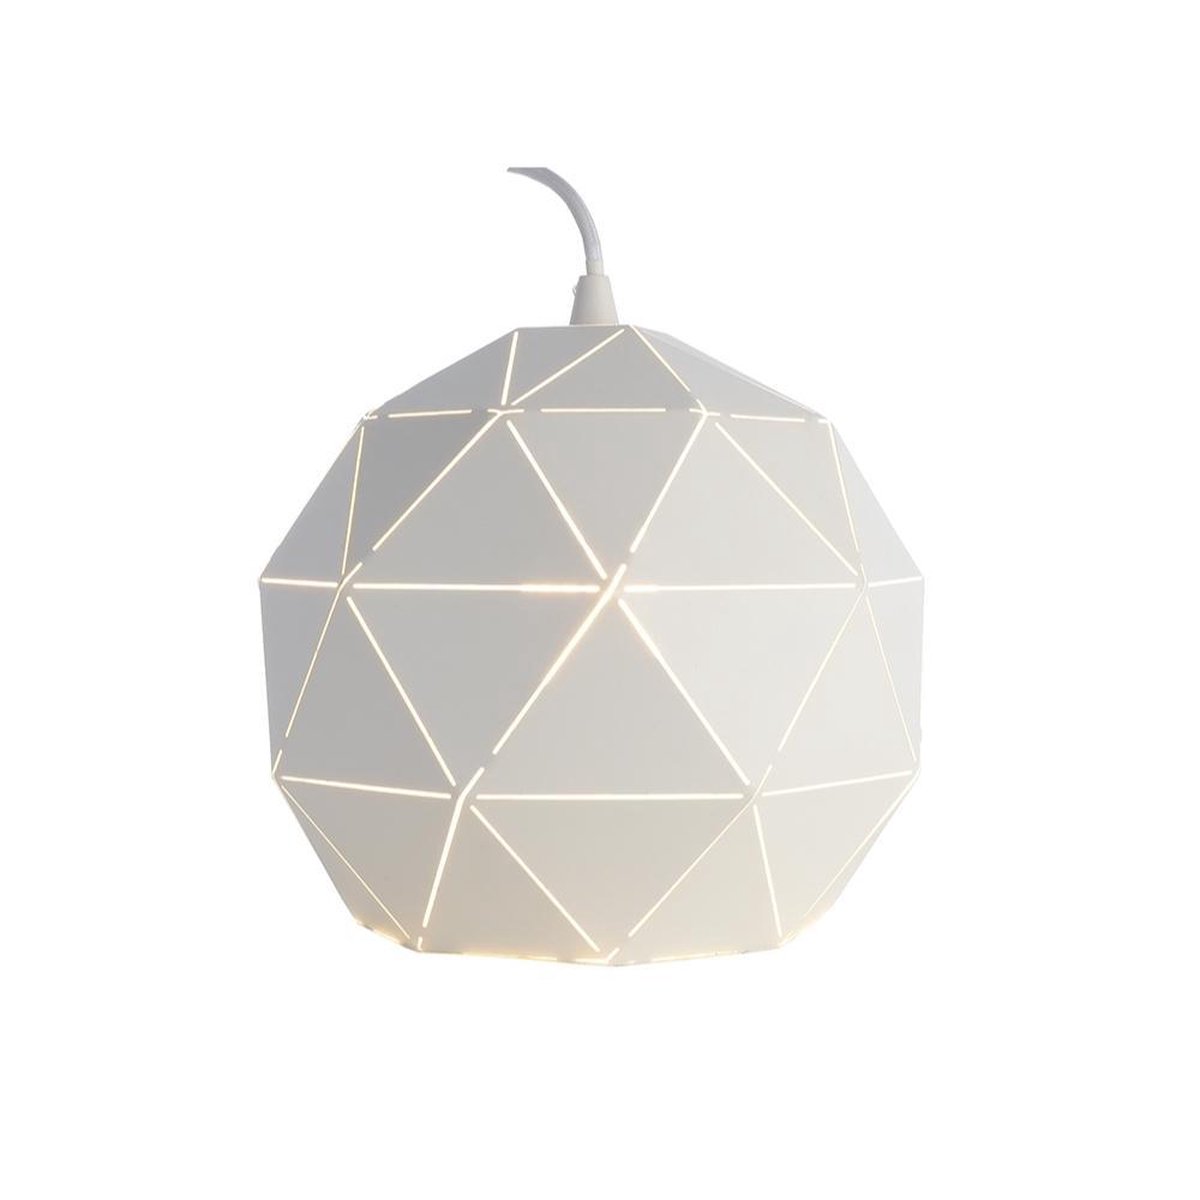 Deko-Light Pendant lamp, Asterope round 250, bulb(s) not included, constant voltage, 220-240V AC/50-60Hz, number of bases: 1, E27, 1x max. 60,00 W, metal, matt white, IP20